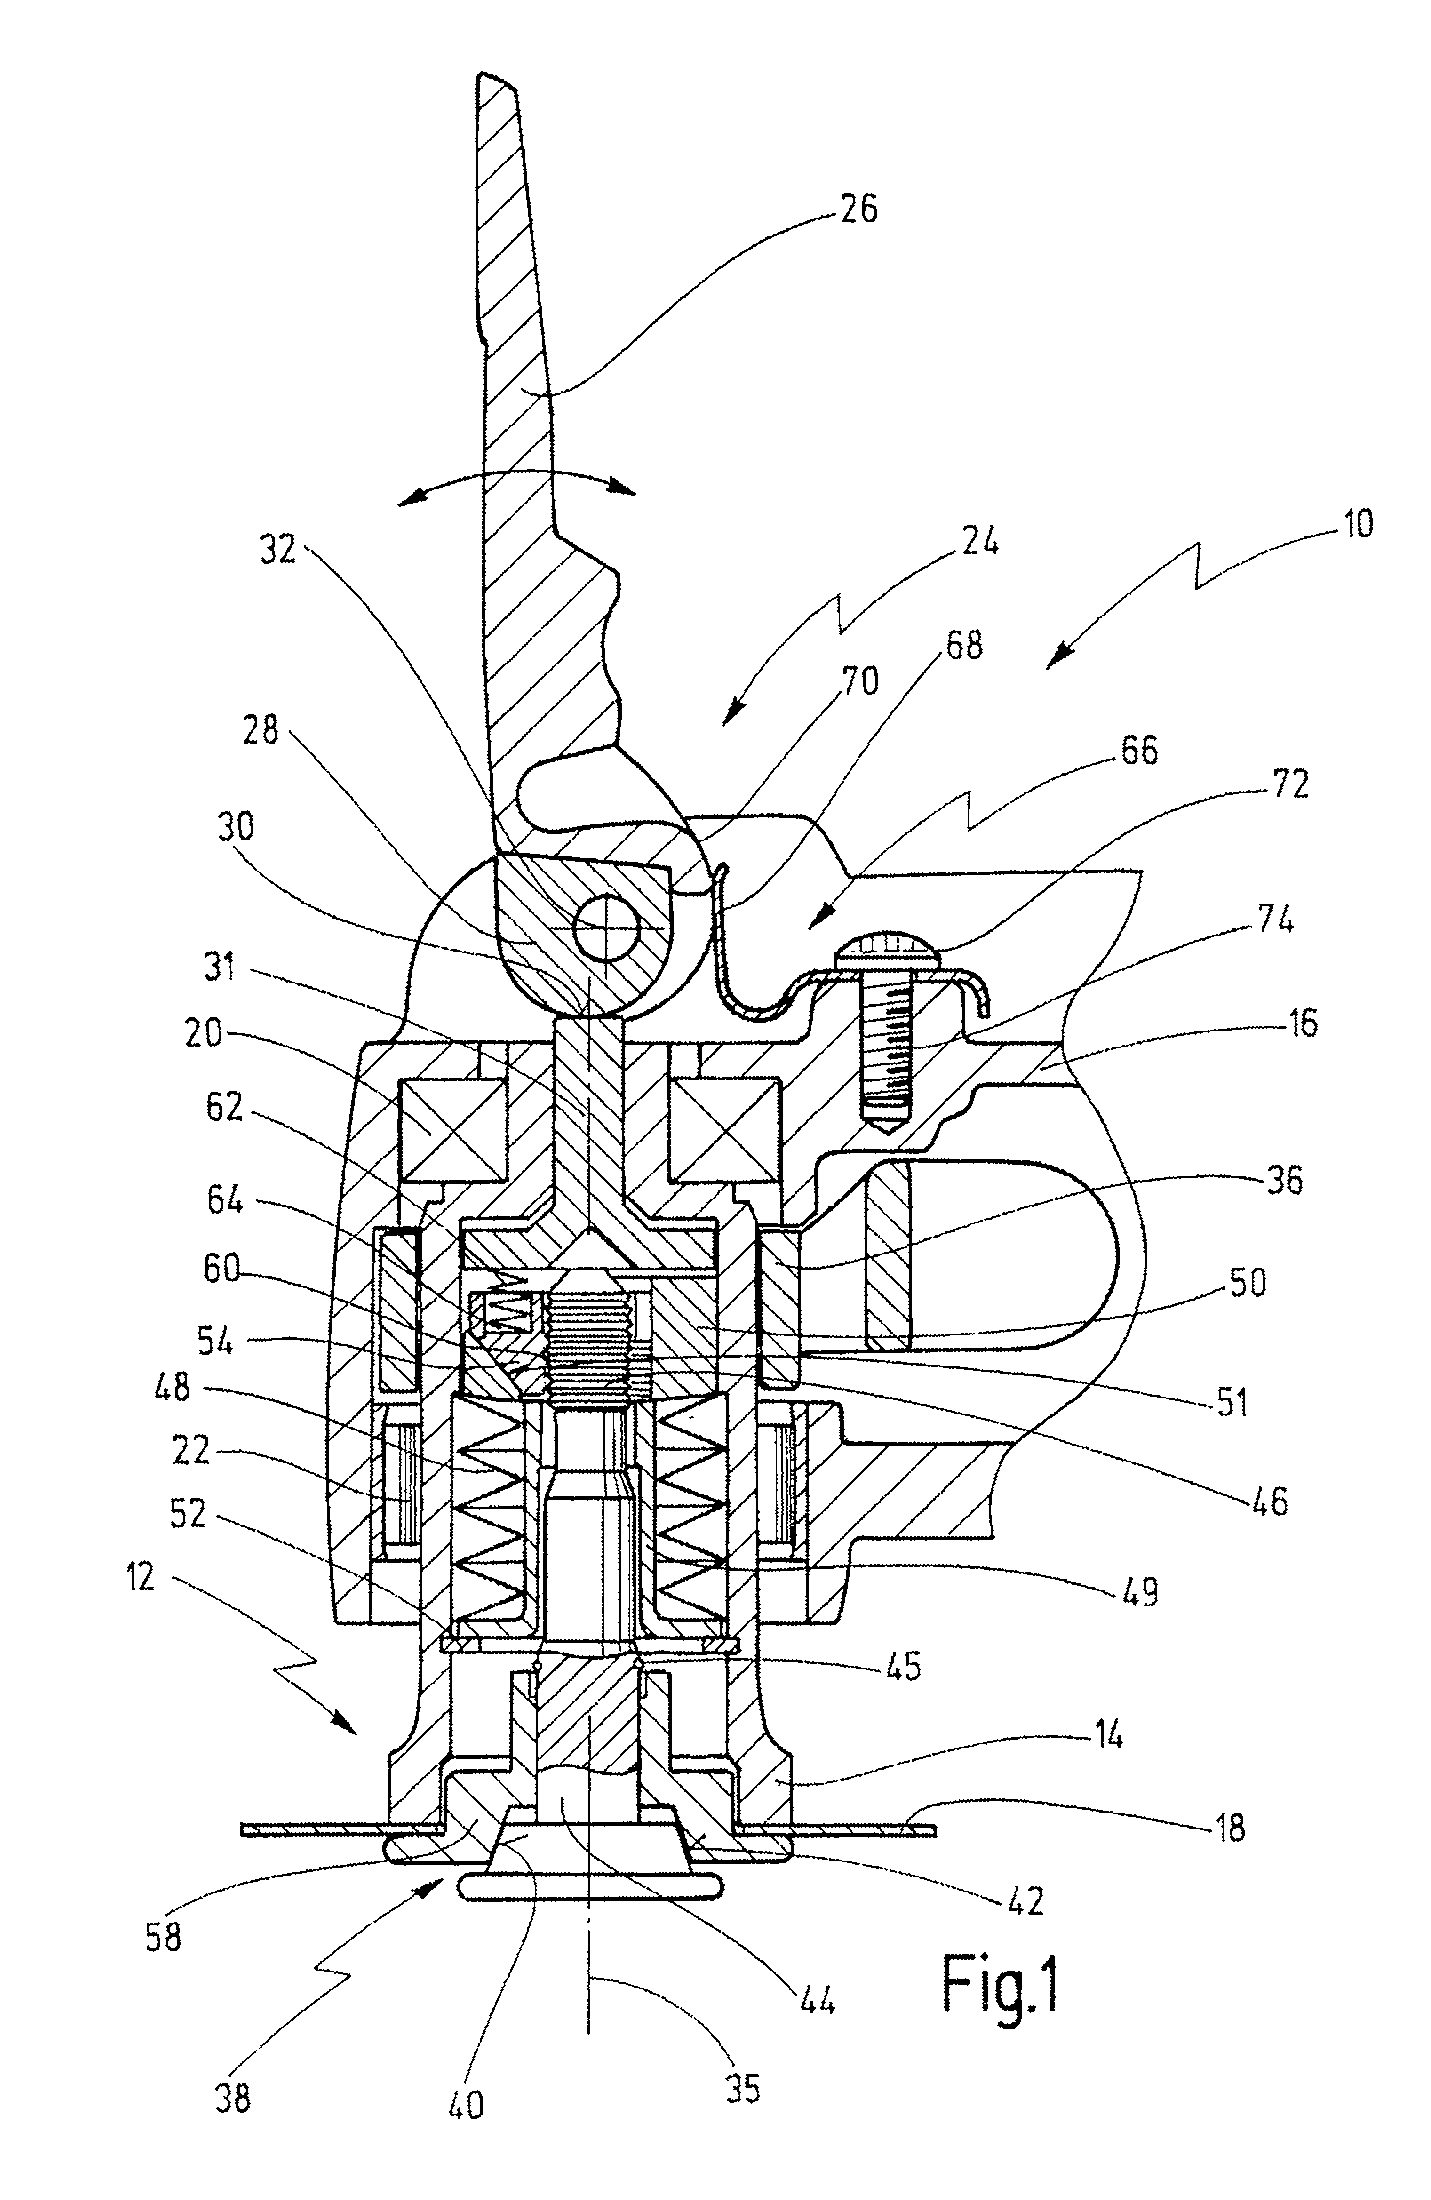 Power-driven hand tool with clamping fixture for a tool